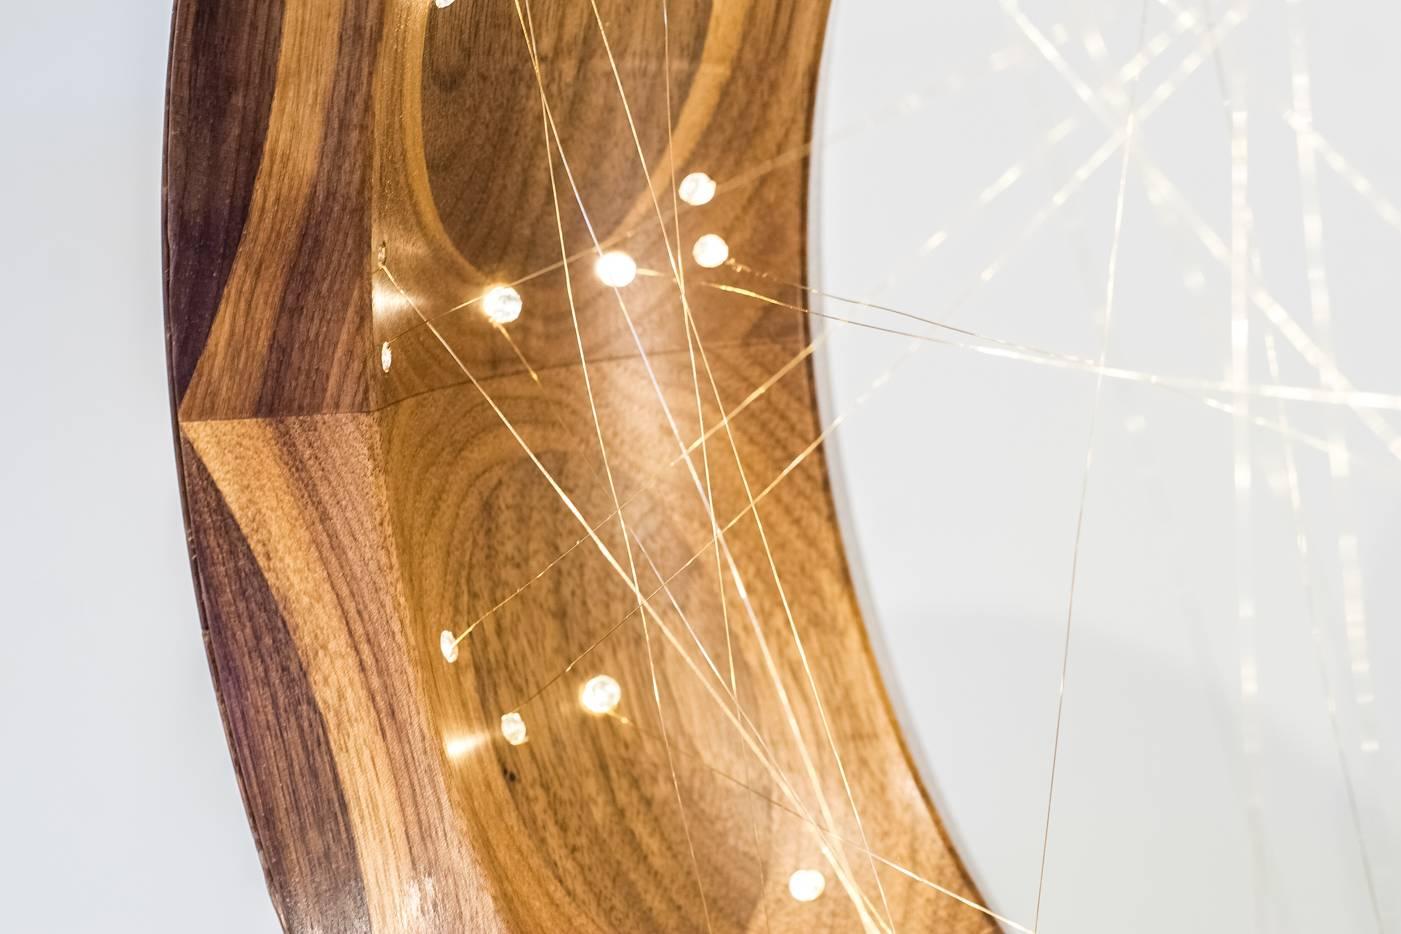 American Accretion, Tabletop Light Sculpture in Walnut and Gold Wire by Kalin Asenov